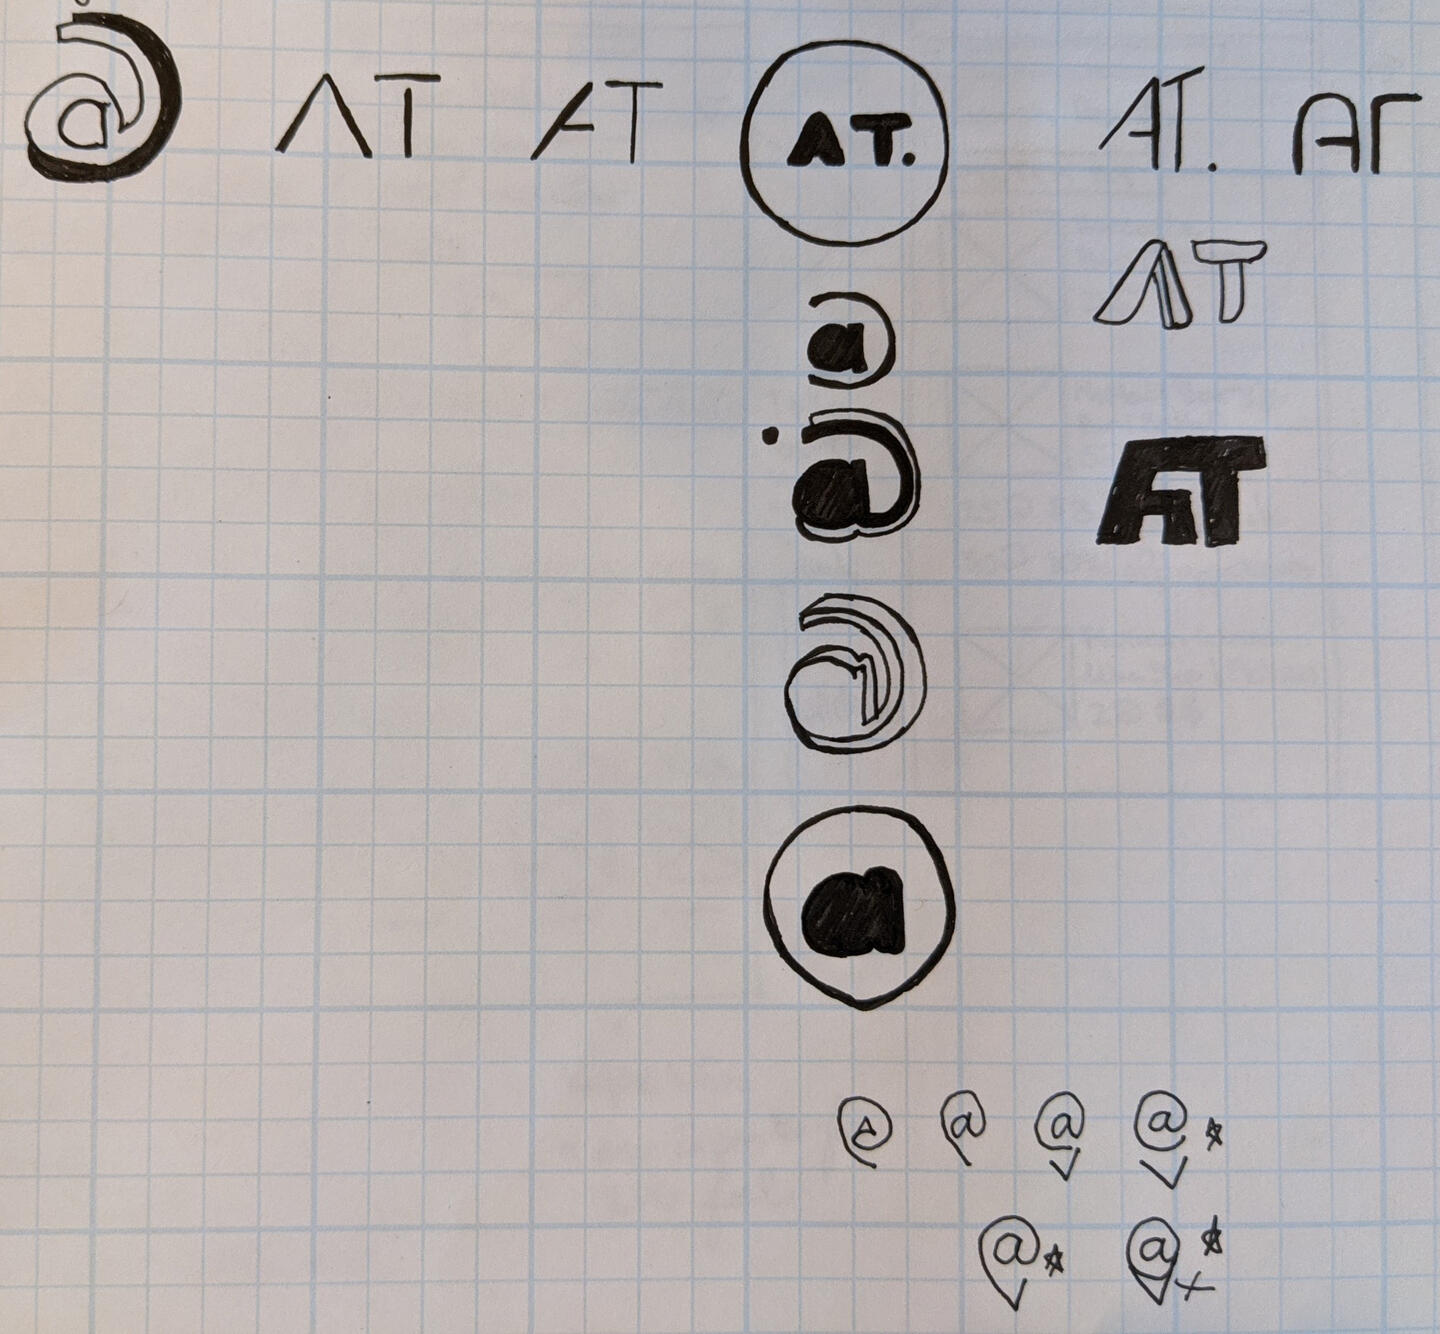 Rough sketches of @'s new logo.